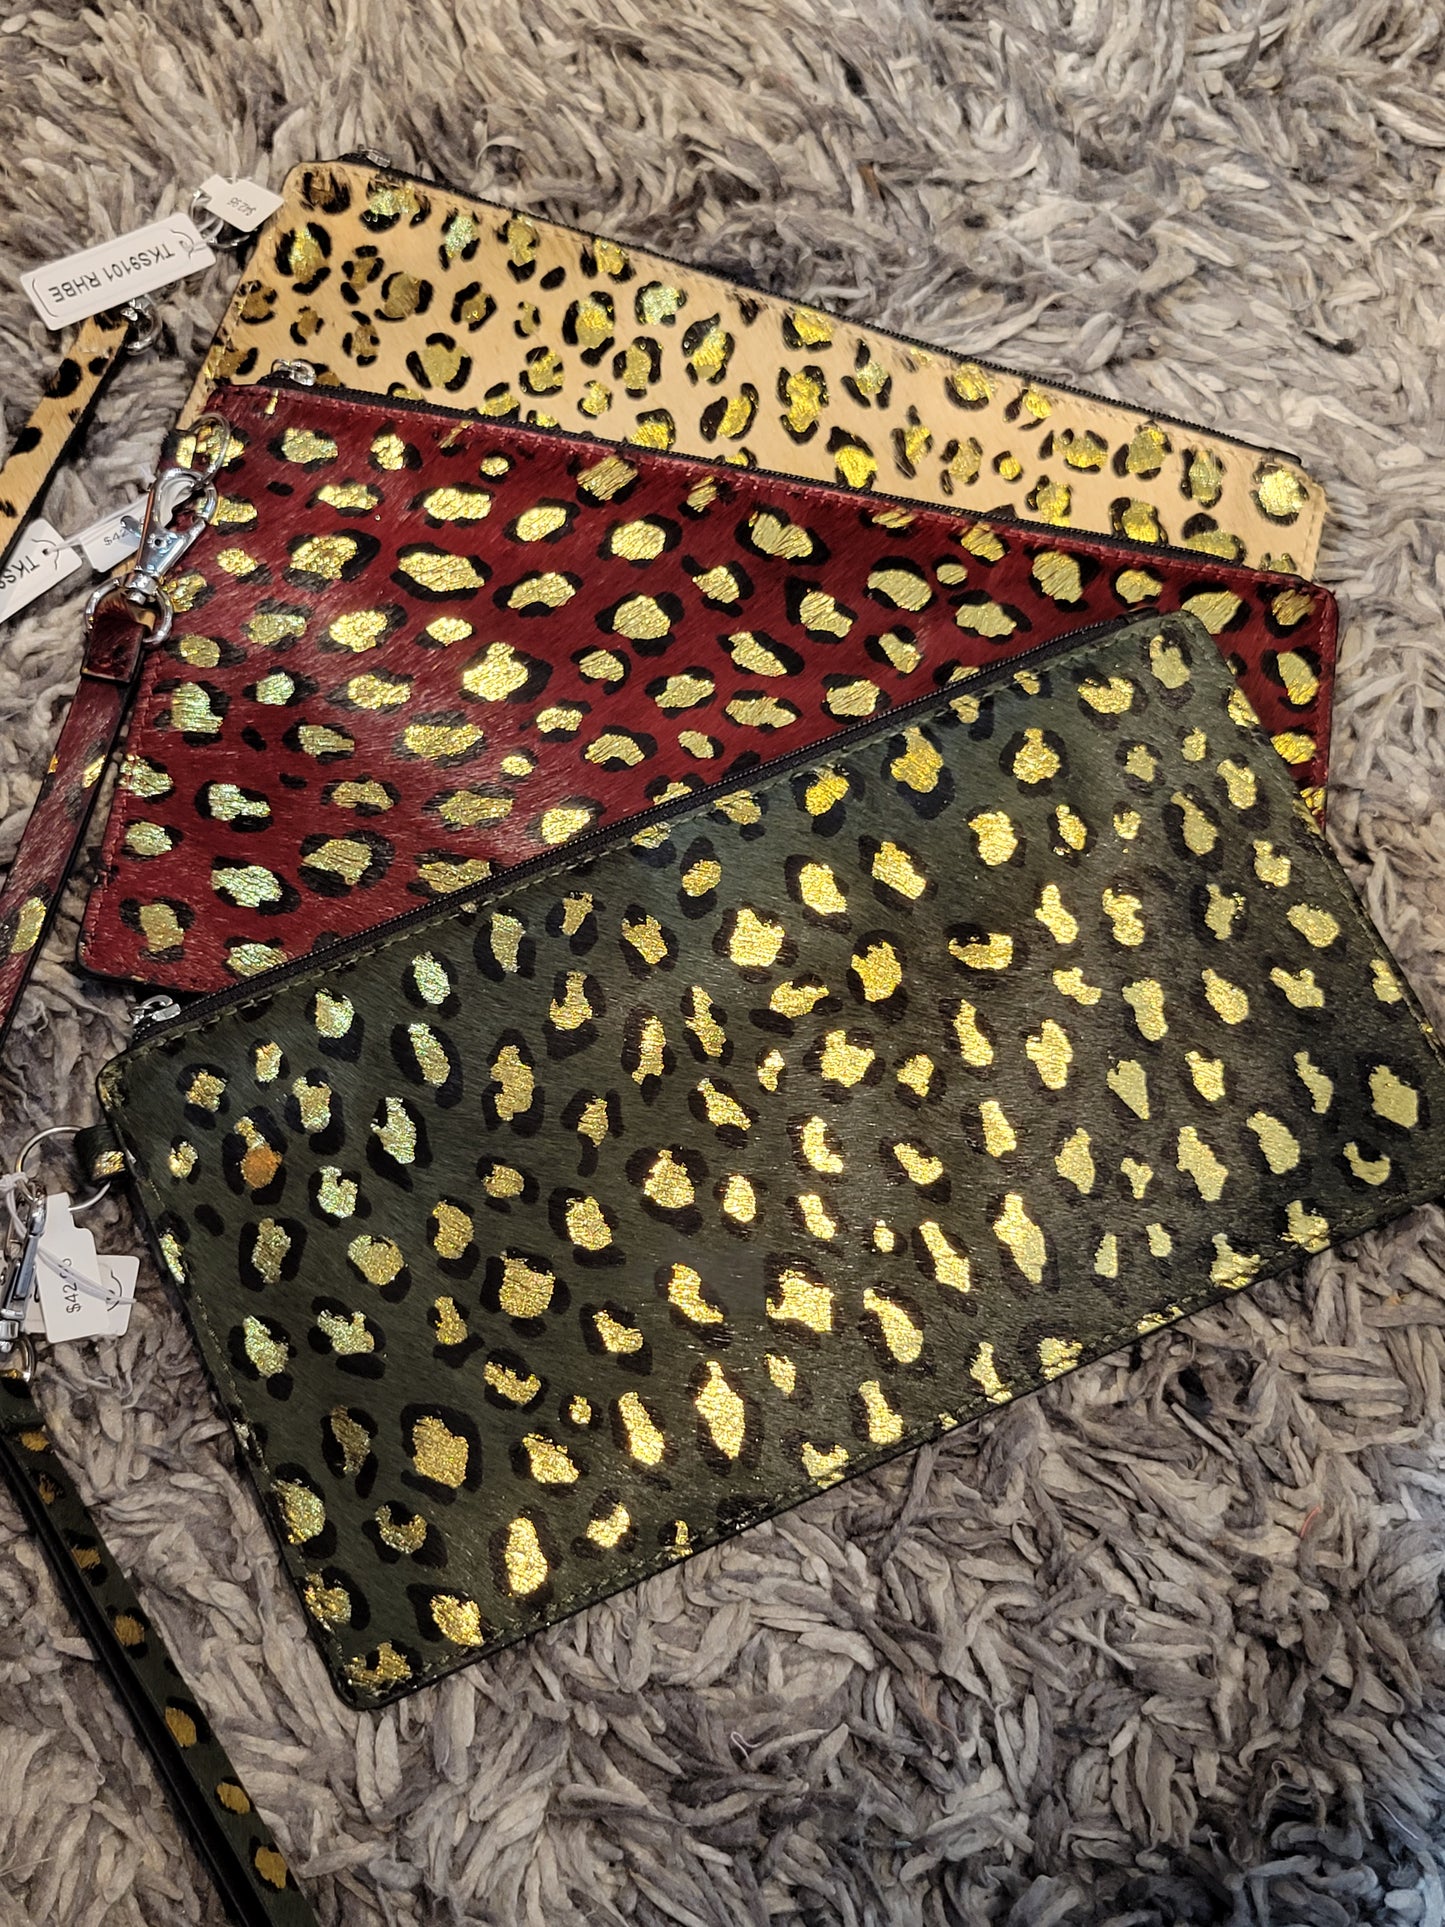 Leather Olive & Gold Leopard Print Clutch